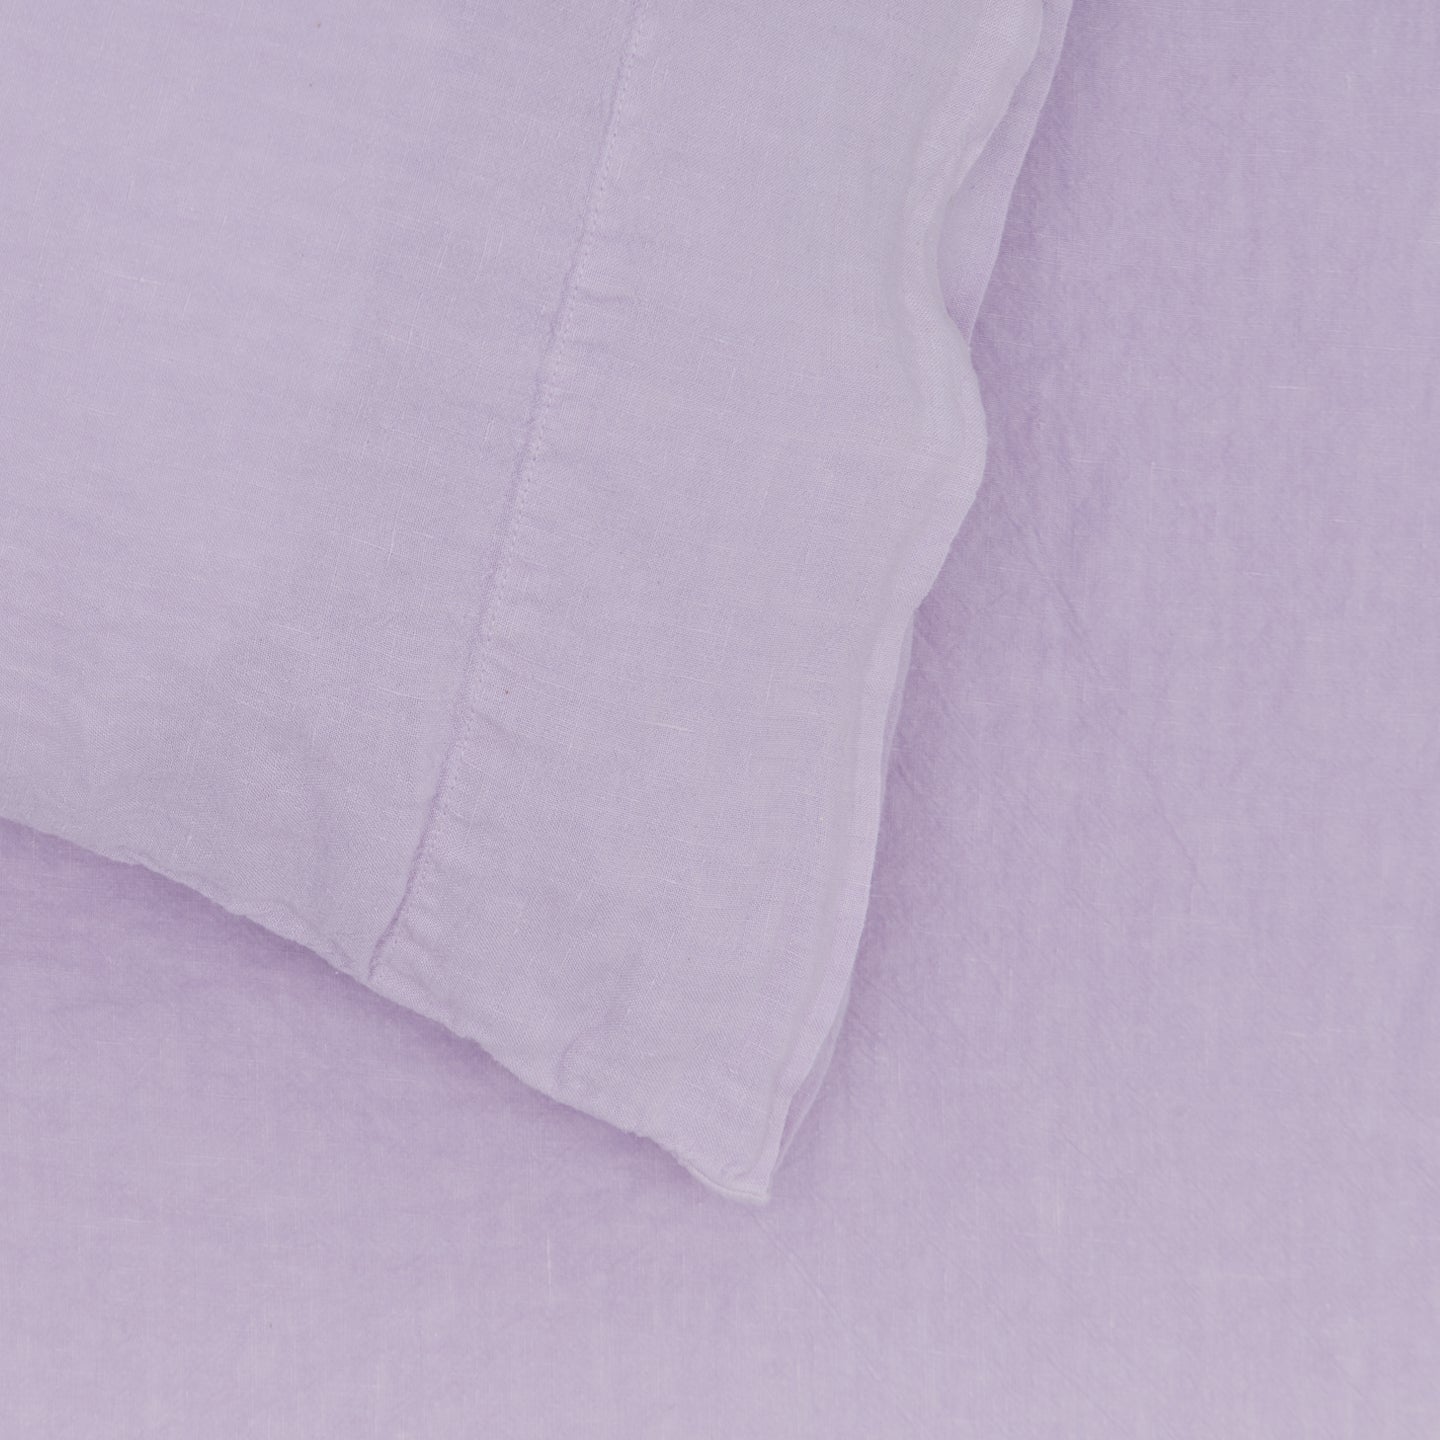 Simple Linen Pillowcases, Set of 2 - Lilac